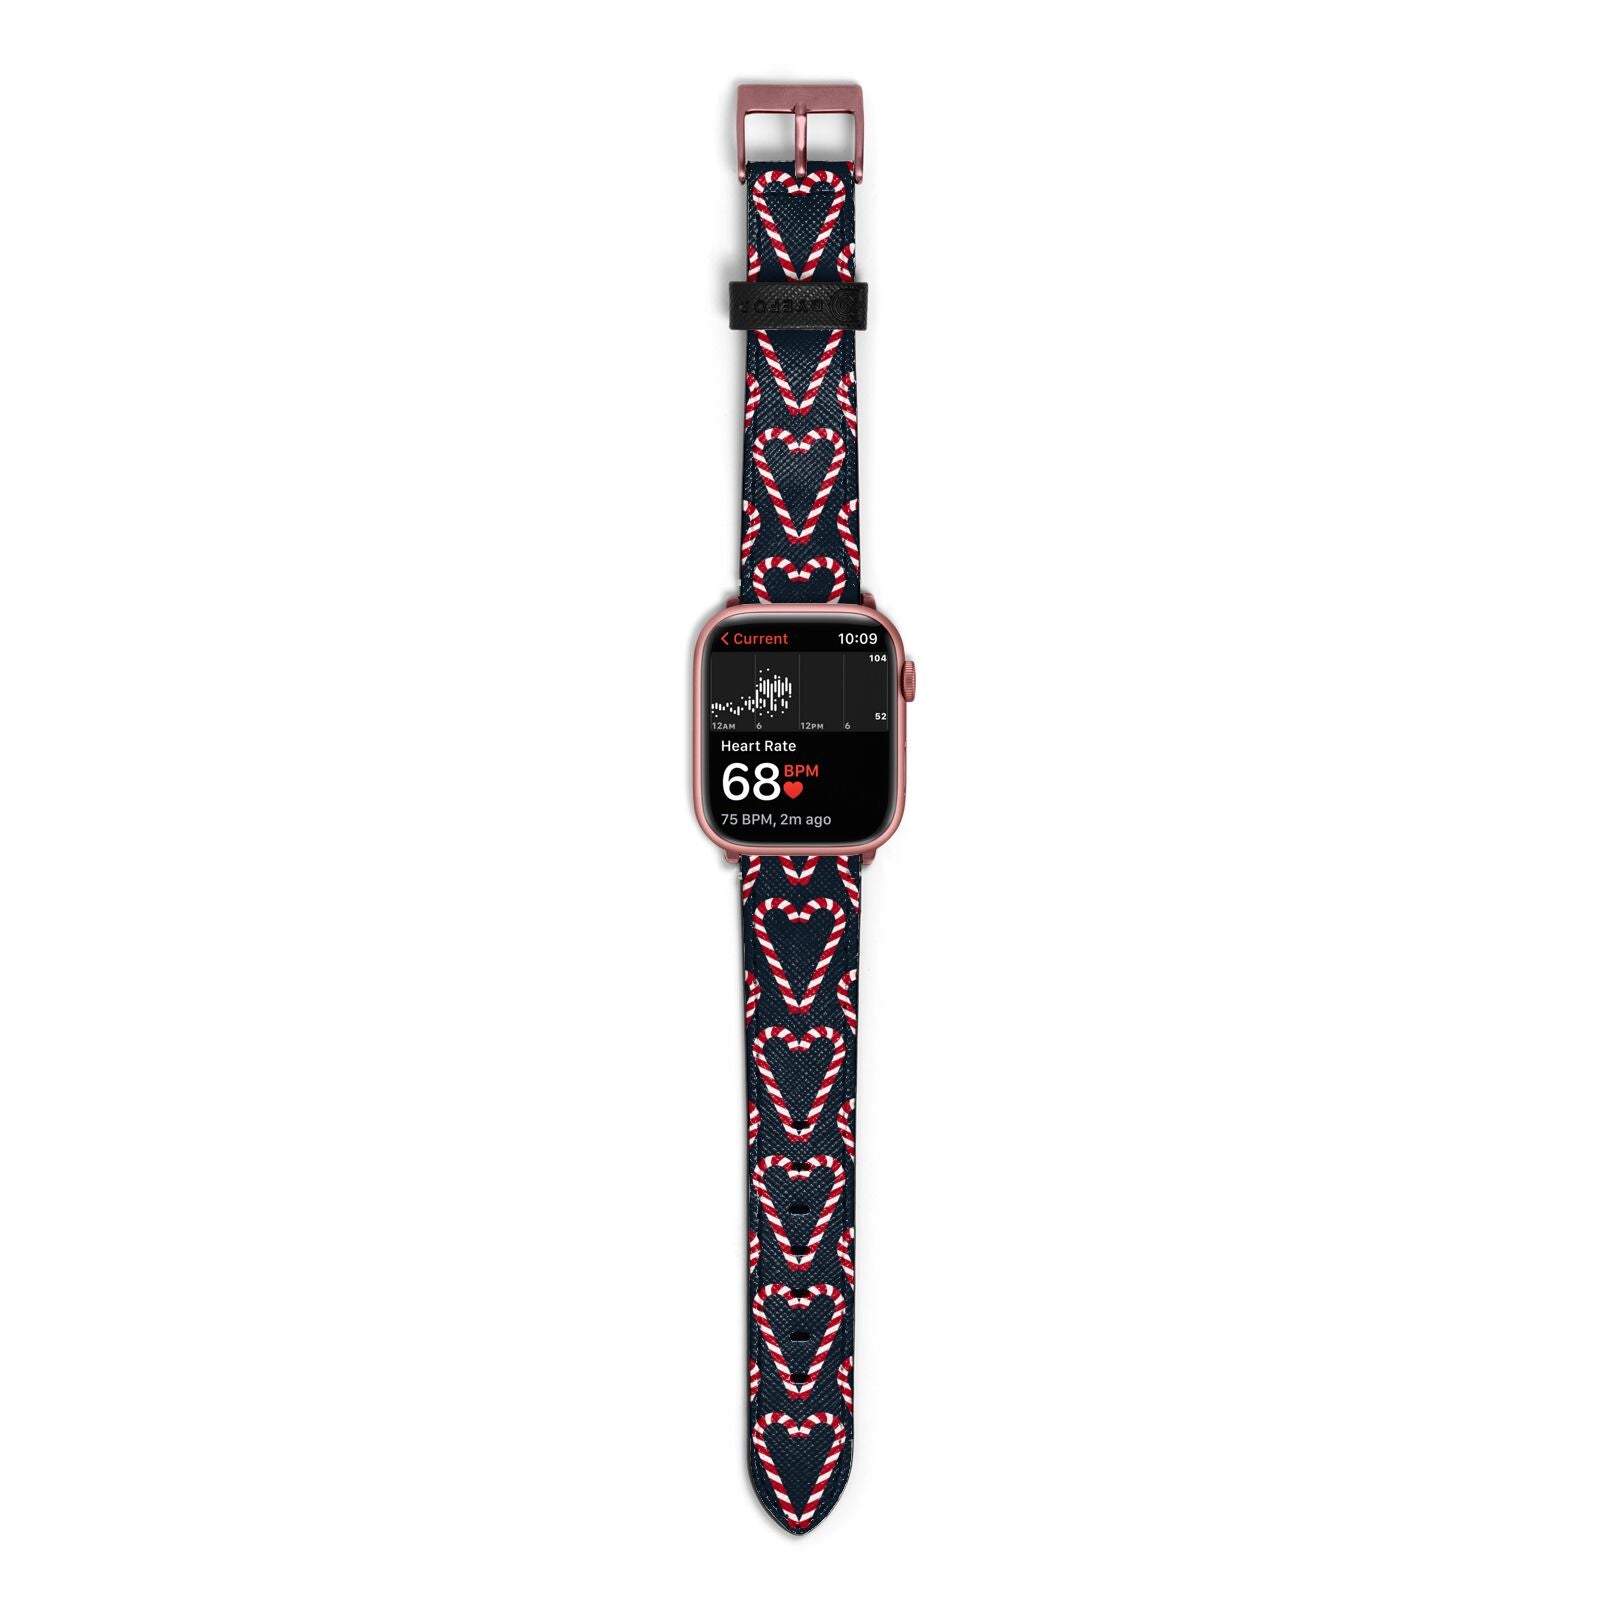 Candy Cane Pattern Apple Watch Strap Size 38mm with Rose Gold Hardware